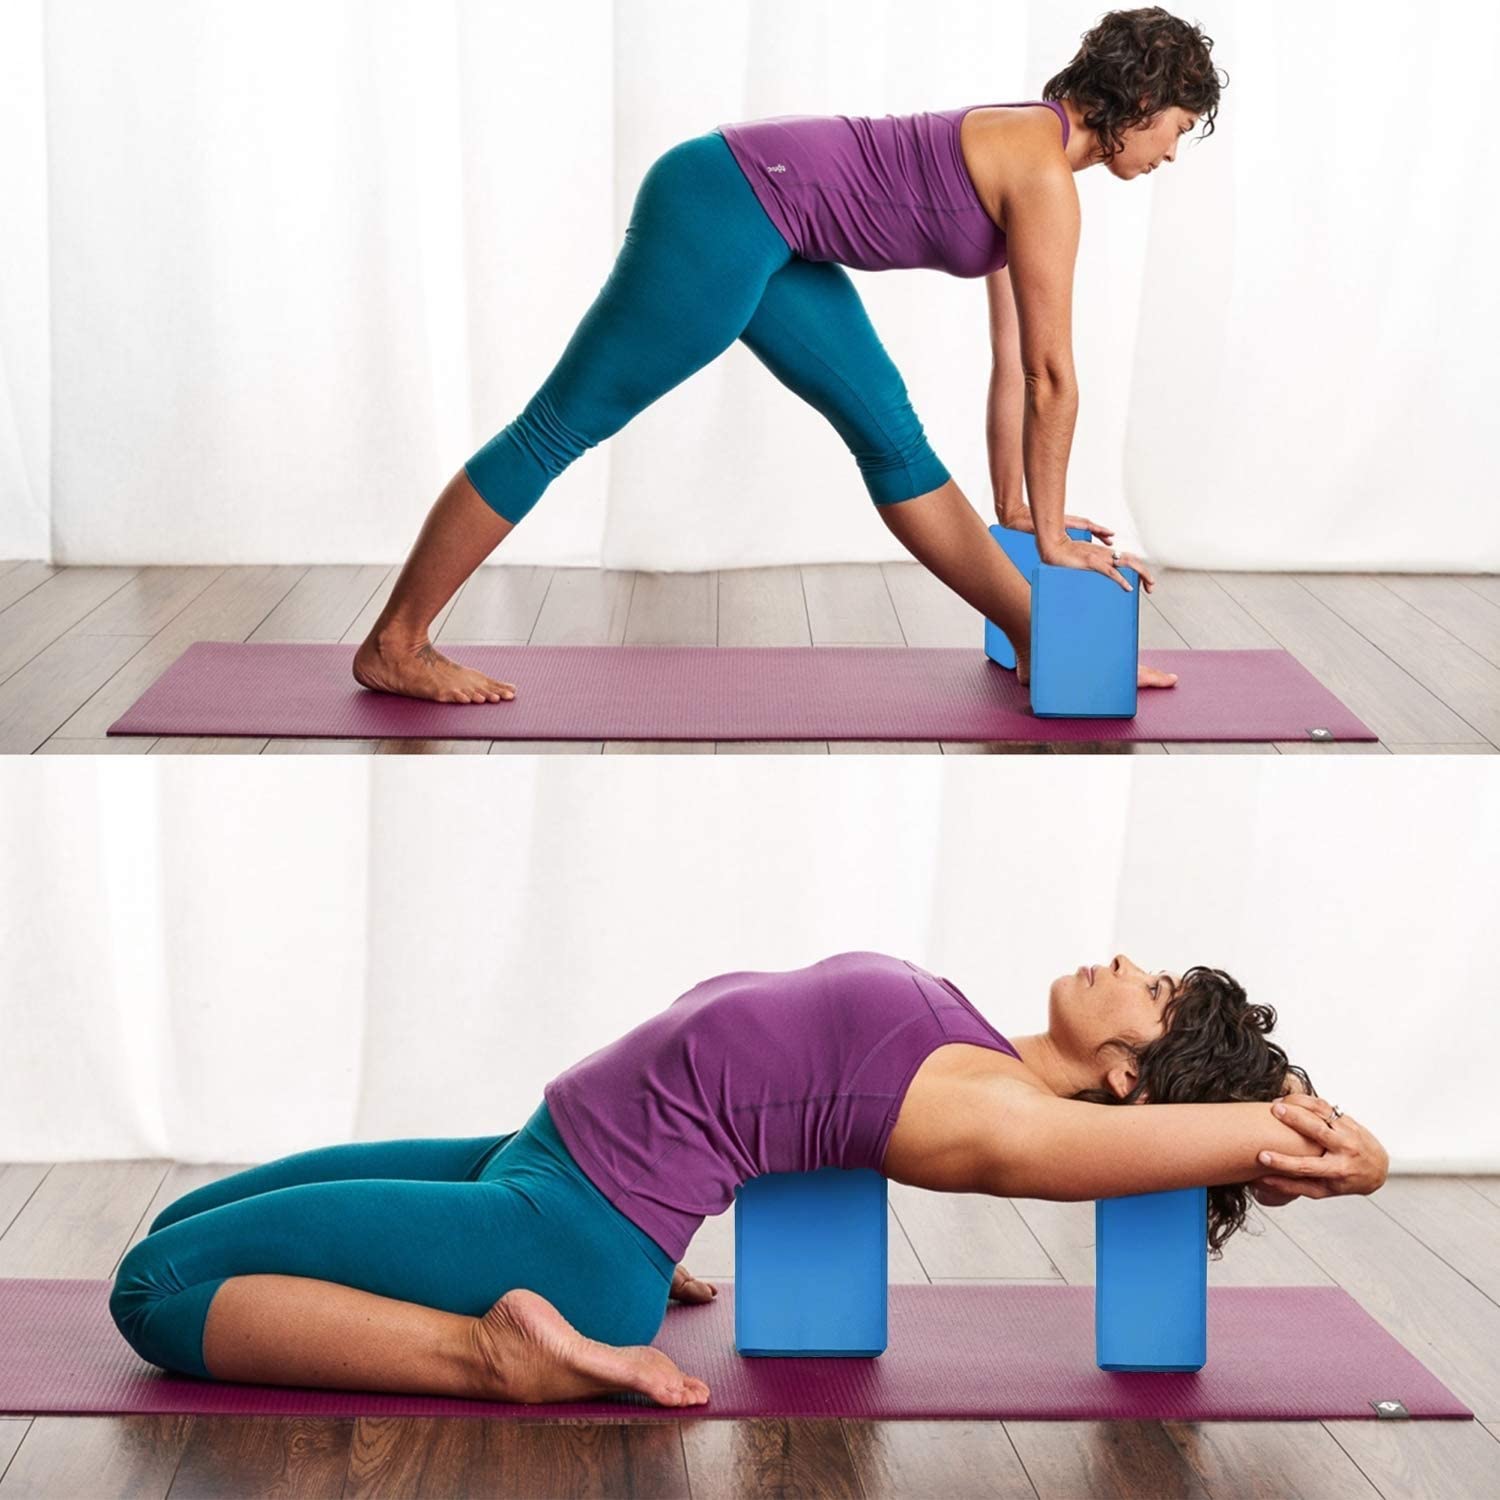 REEHUT Yoga Blocks 1-PC/ 2-PC, High Density EVA Foam Blocks to Support and  Deepen Poses, Improve Strength and Aid Balance and Flexibility -  Lightweight, Odor Resistant - Compleo Waco, LLC